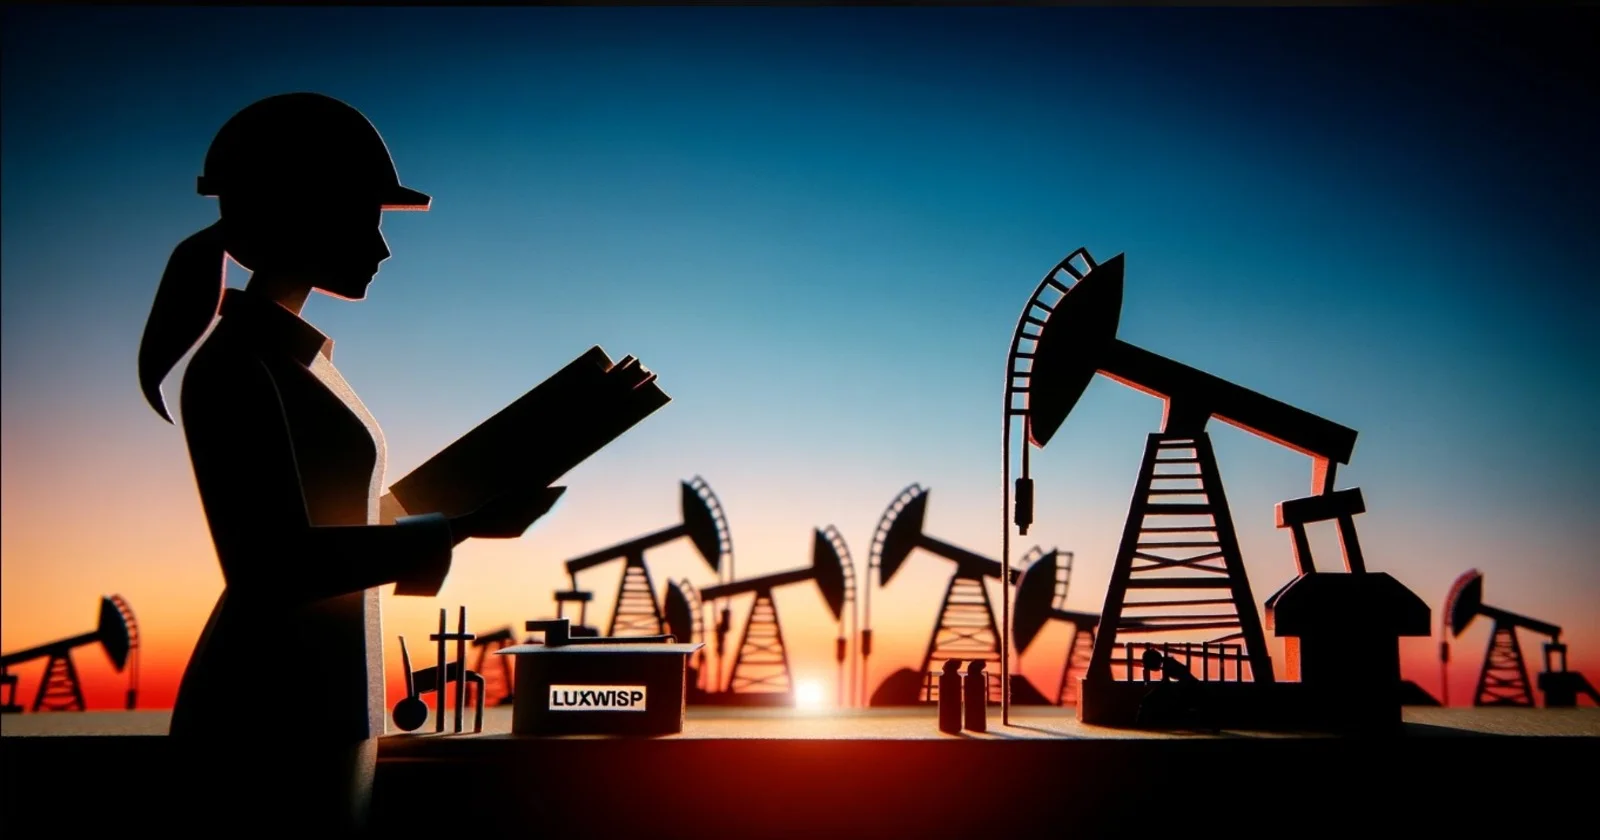 20 Pros and Cons of Oil Energy